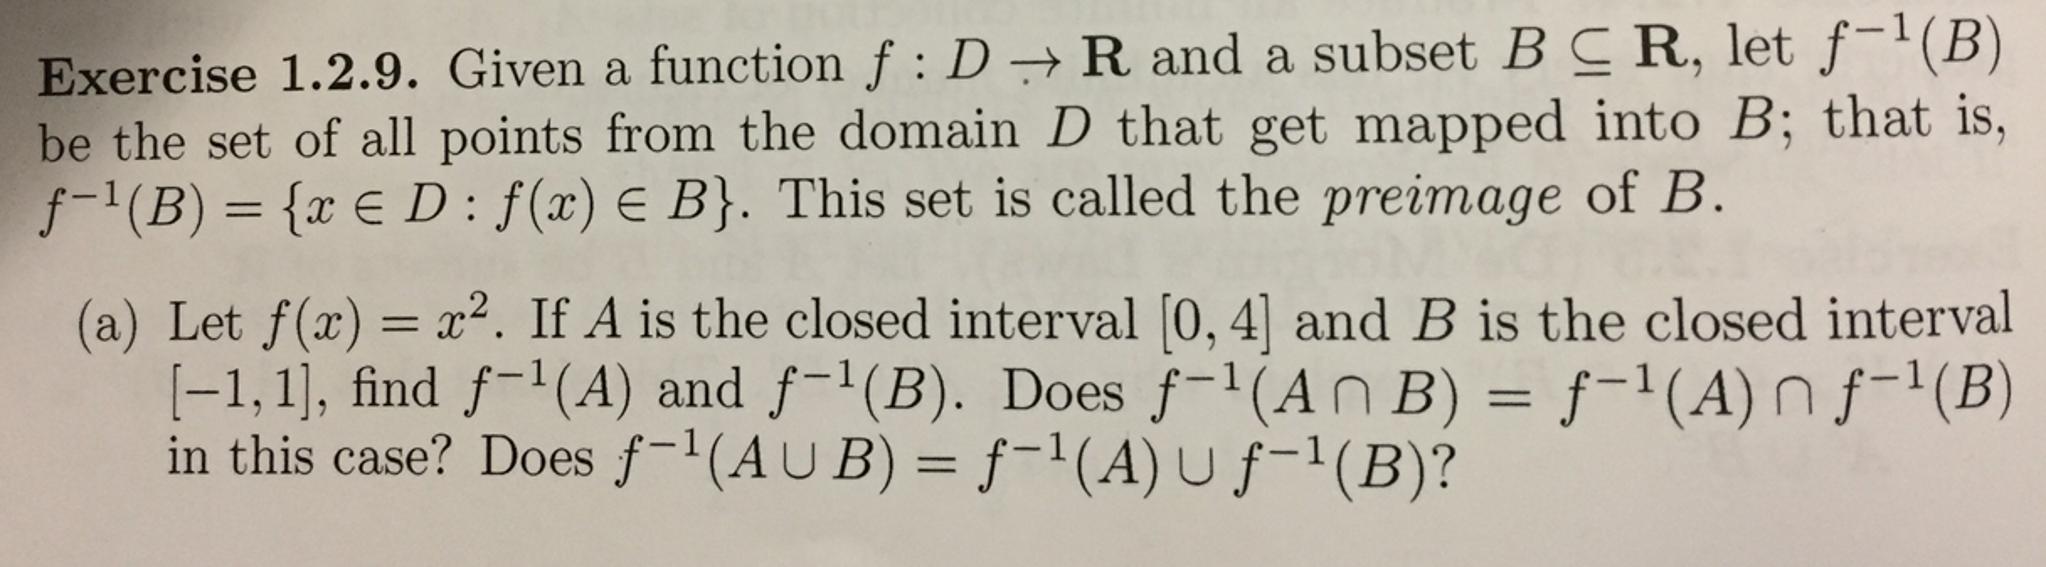 Given a function f: D rightarrow R and a subset B